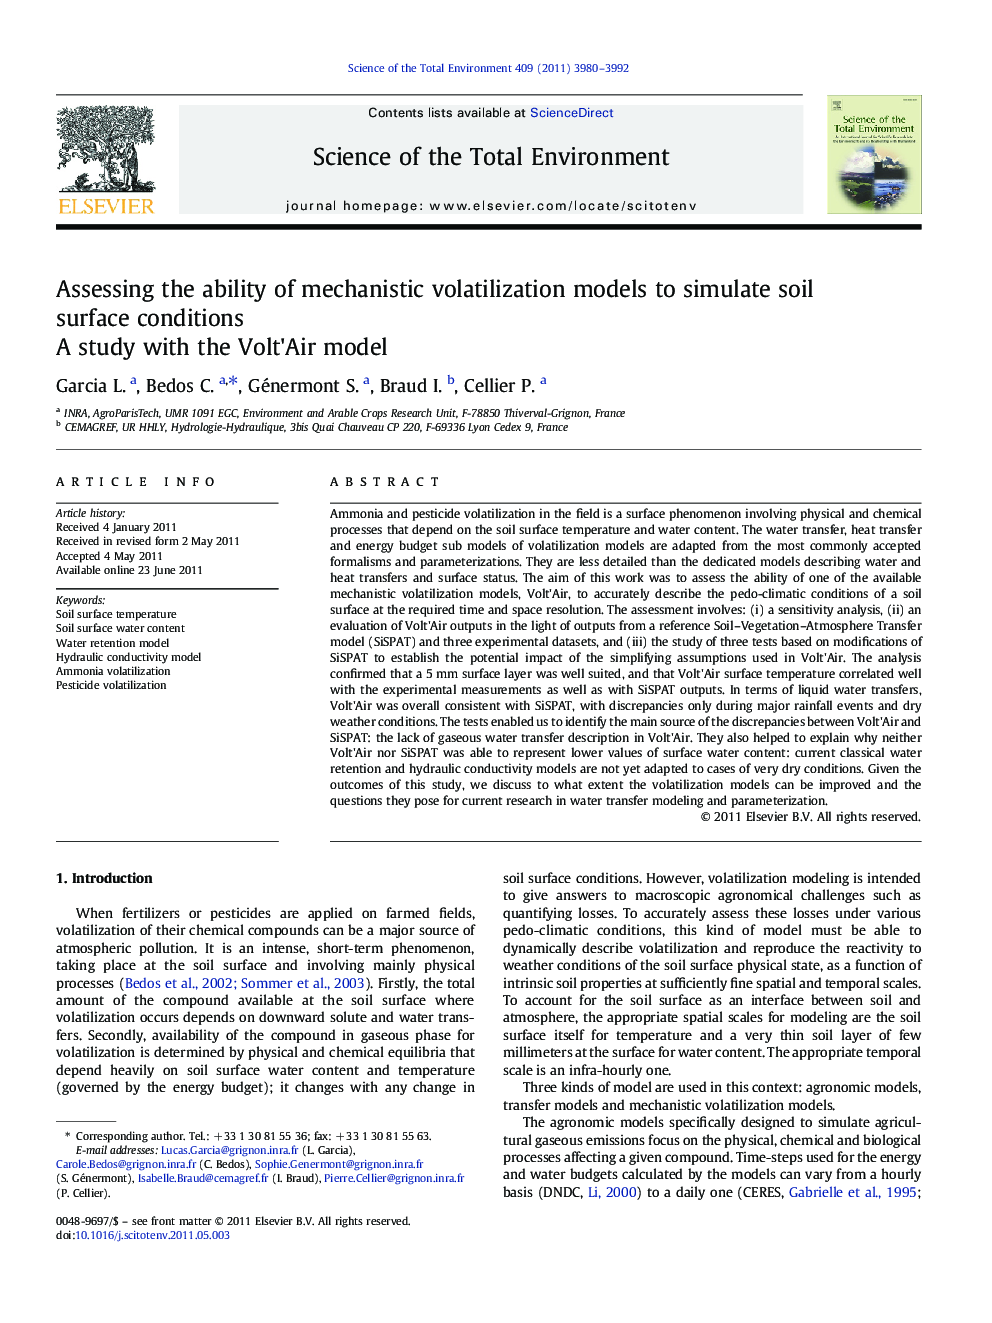 Assessing the ability of mechanistic volatilization models to simulate soil surface conditions: A study with the Volt'Air model